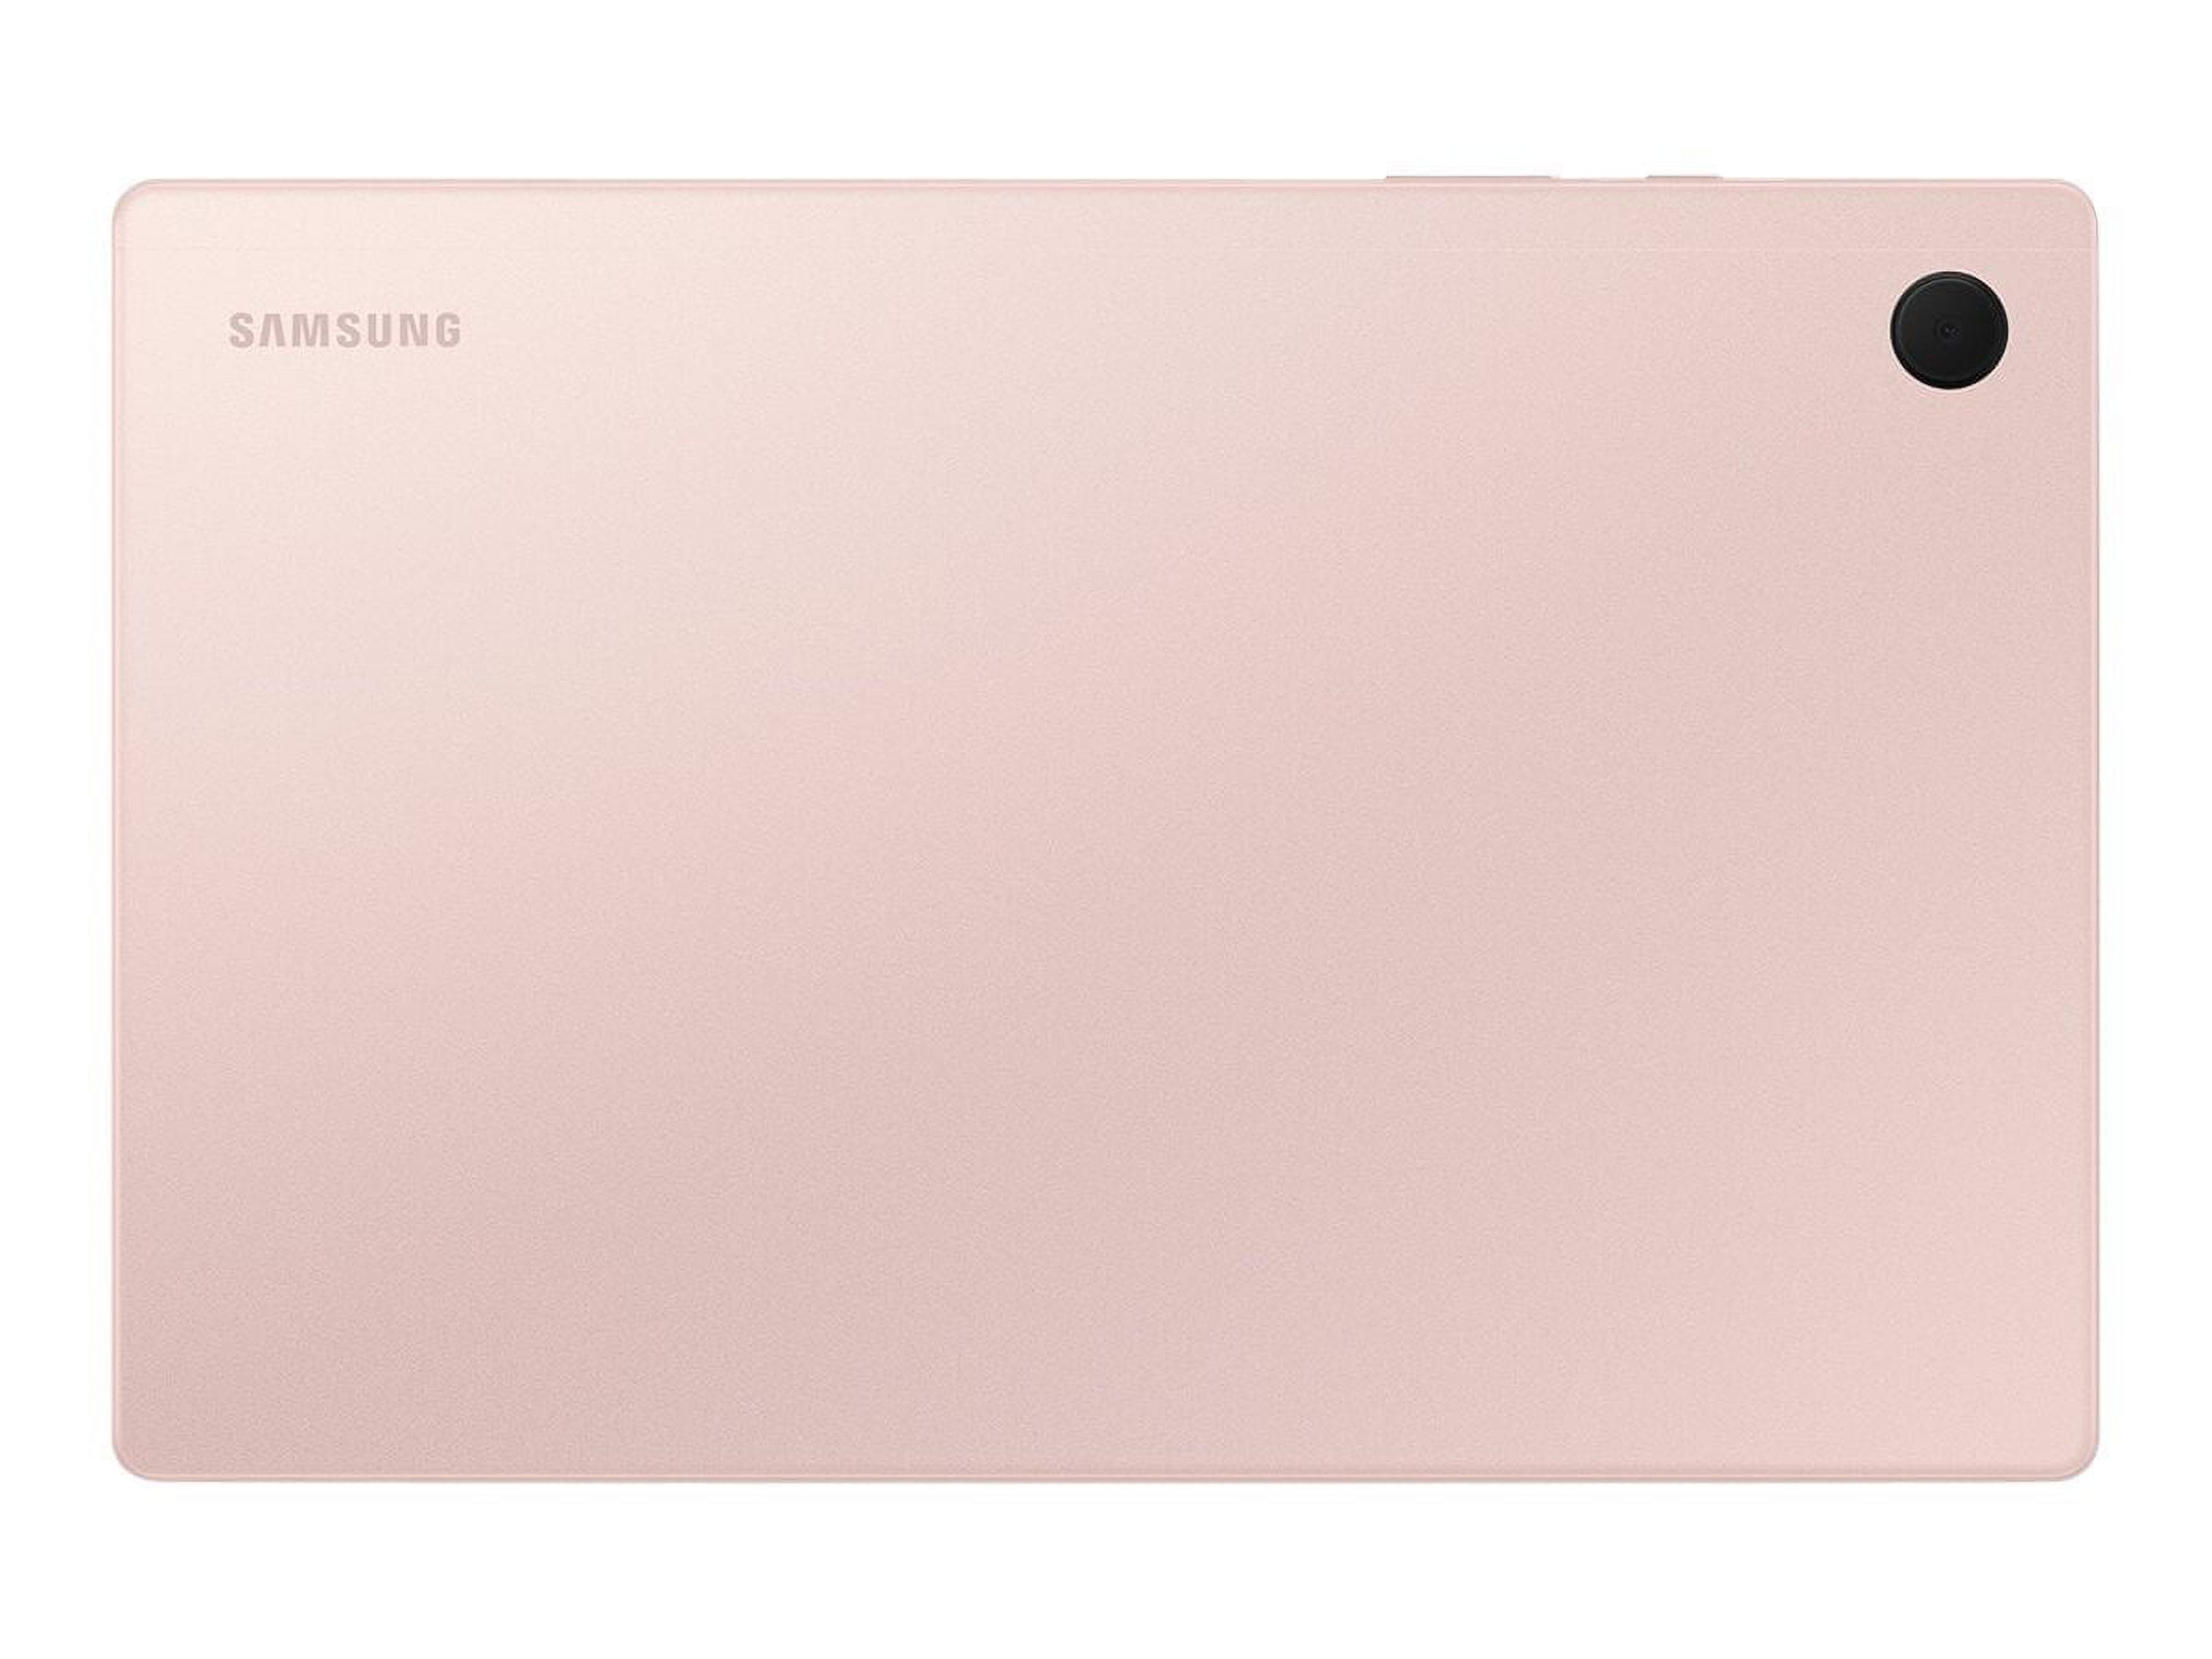 Samsung Galaxy A8 10.5" Tablet, 128GB (Wi-Fi), Pink Gold - image 4 of 8